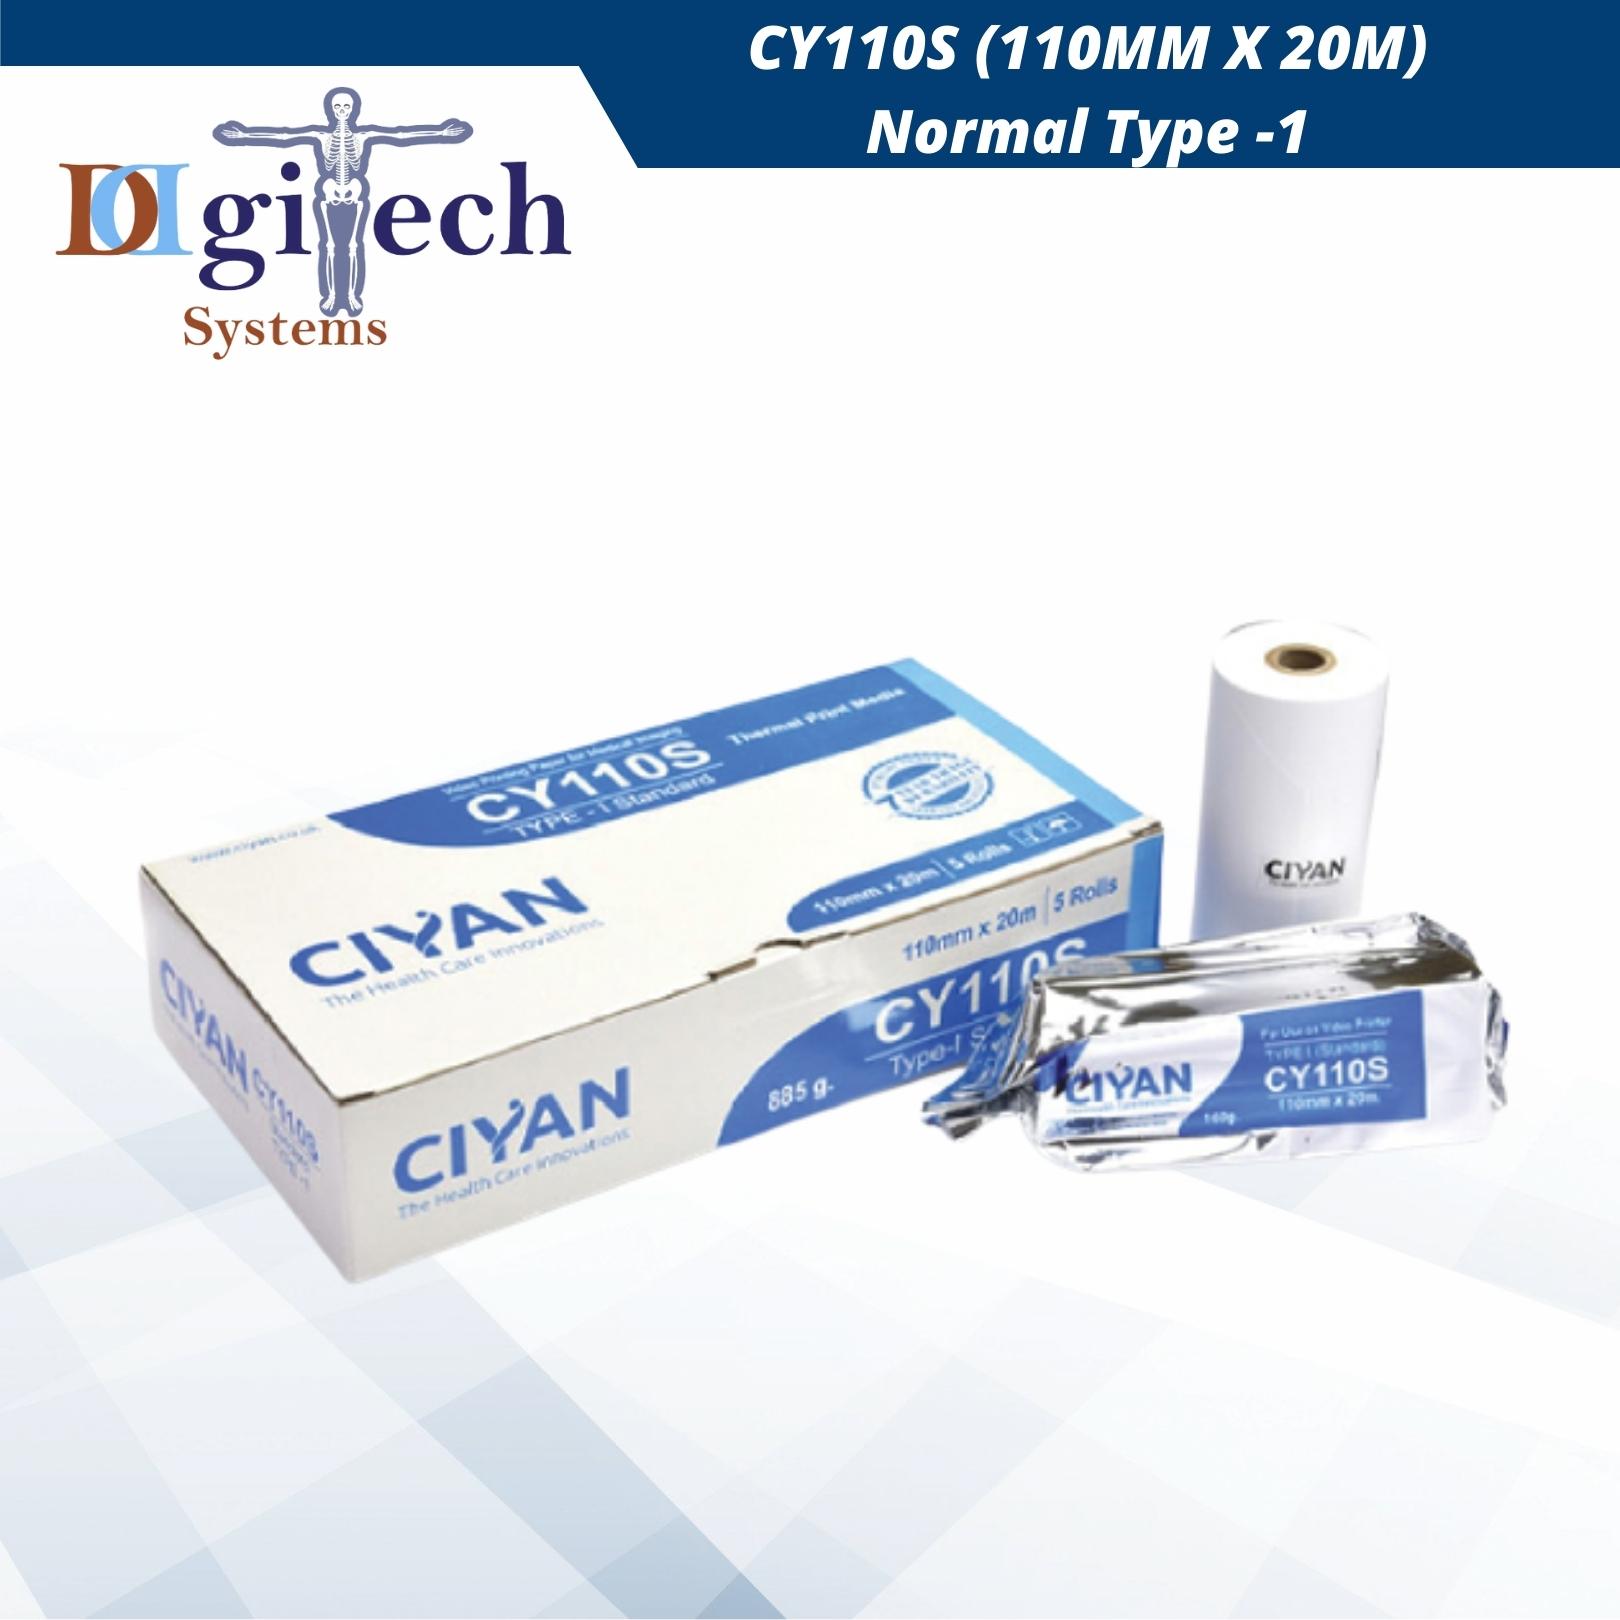 CY110S (110MM X 20M) Normal Type -1​